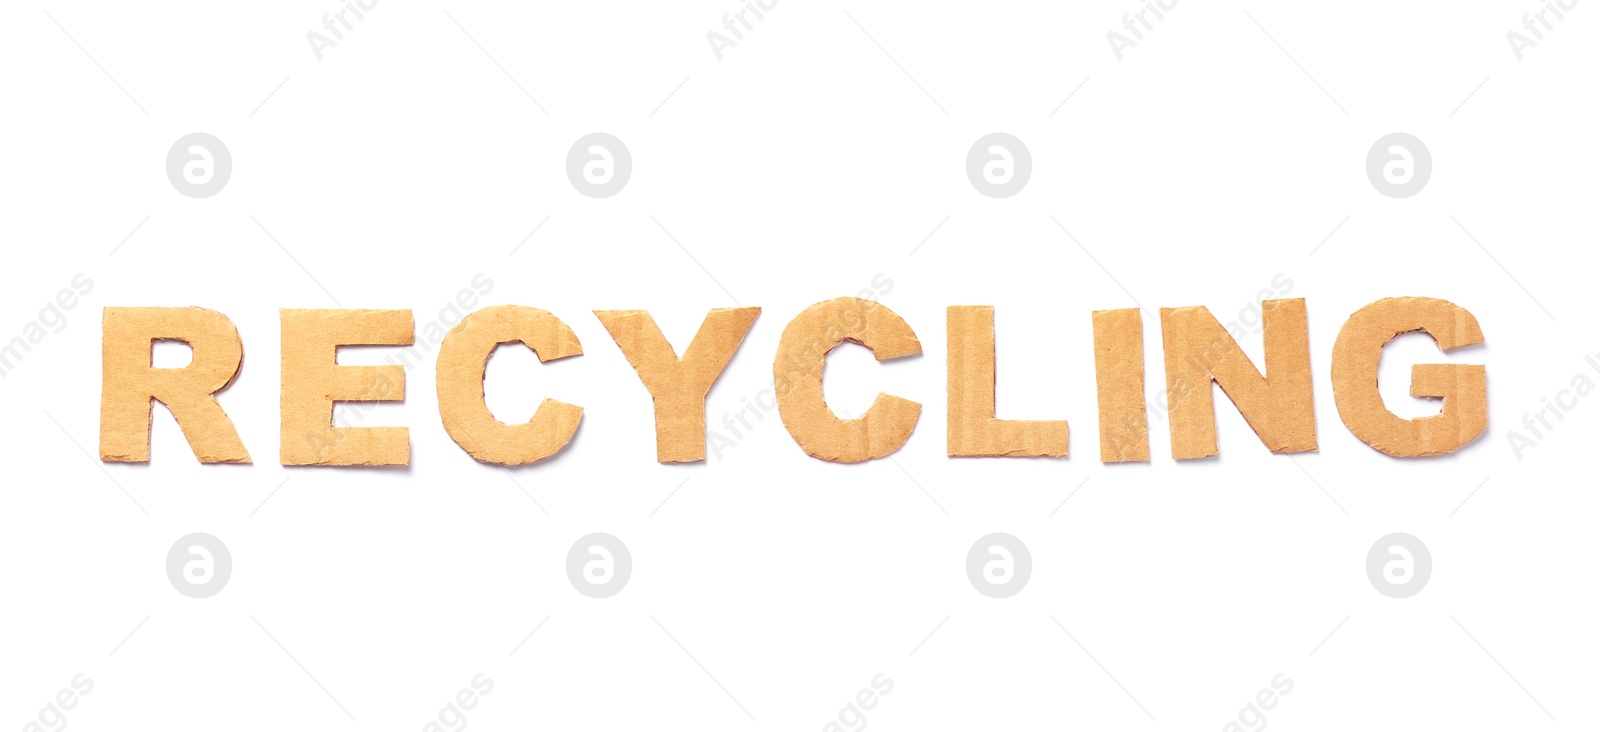 Photo of Word "Recycling" made of cardboard letters on white background